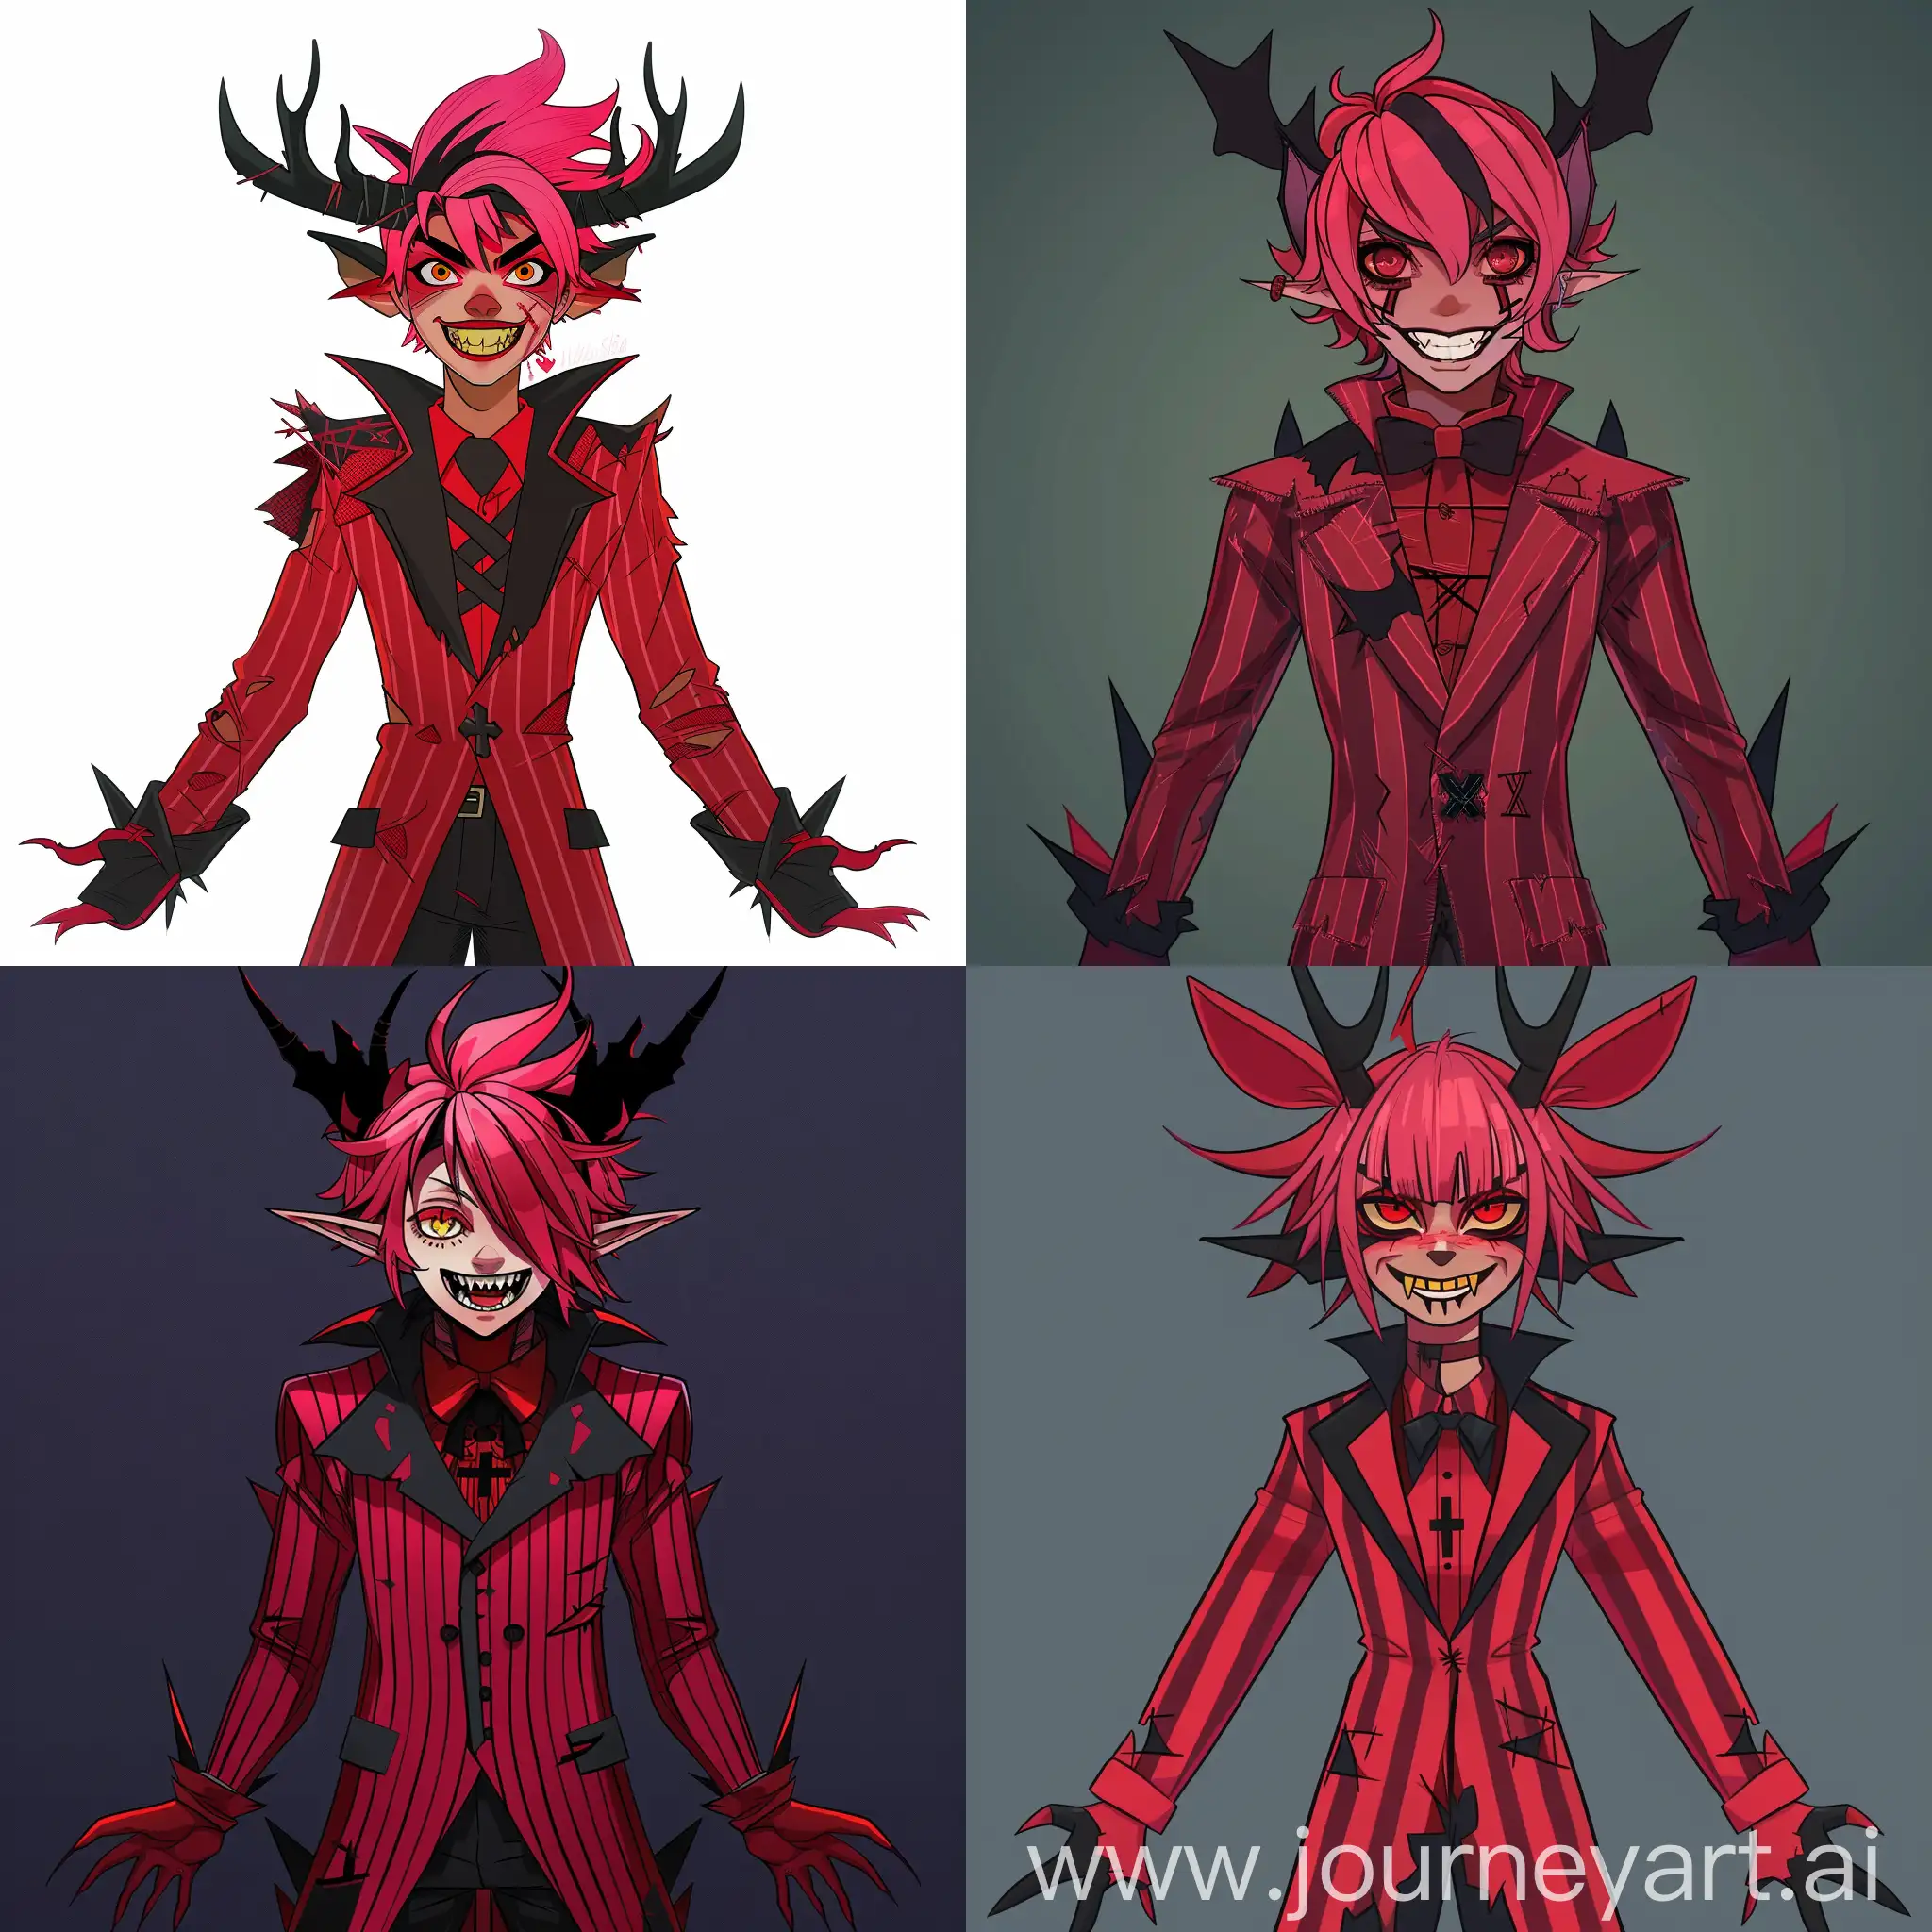 Alastor-the-Demon-with-PinkishRed-Hair-and-Sharp-Yellow-Teeth-in-Vivziepop-Style